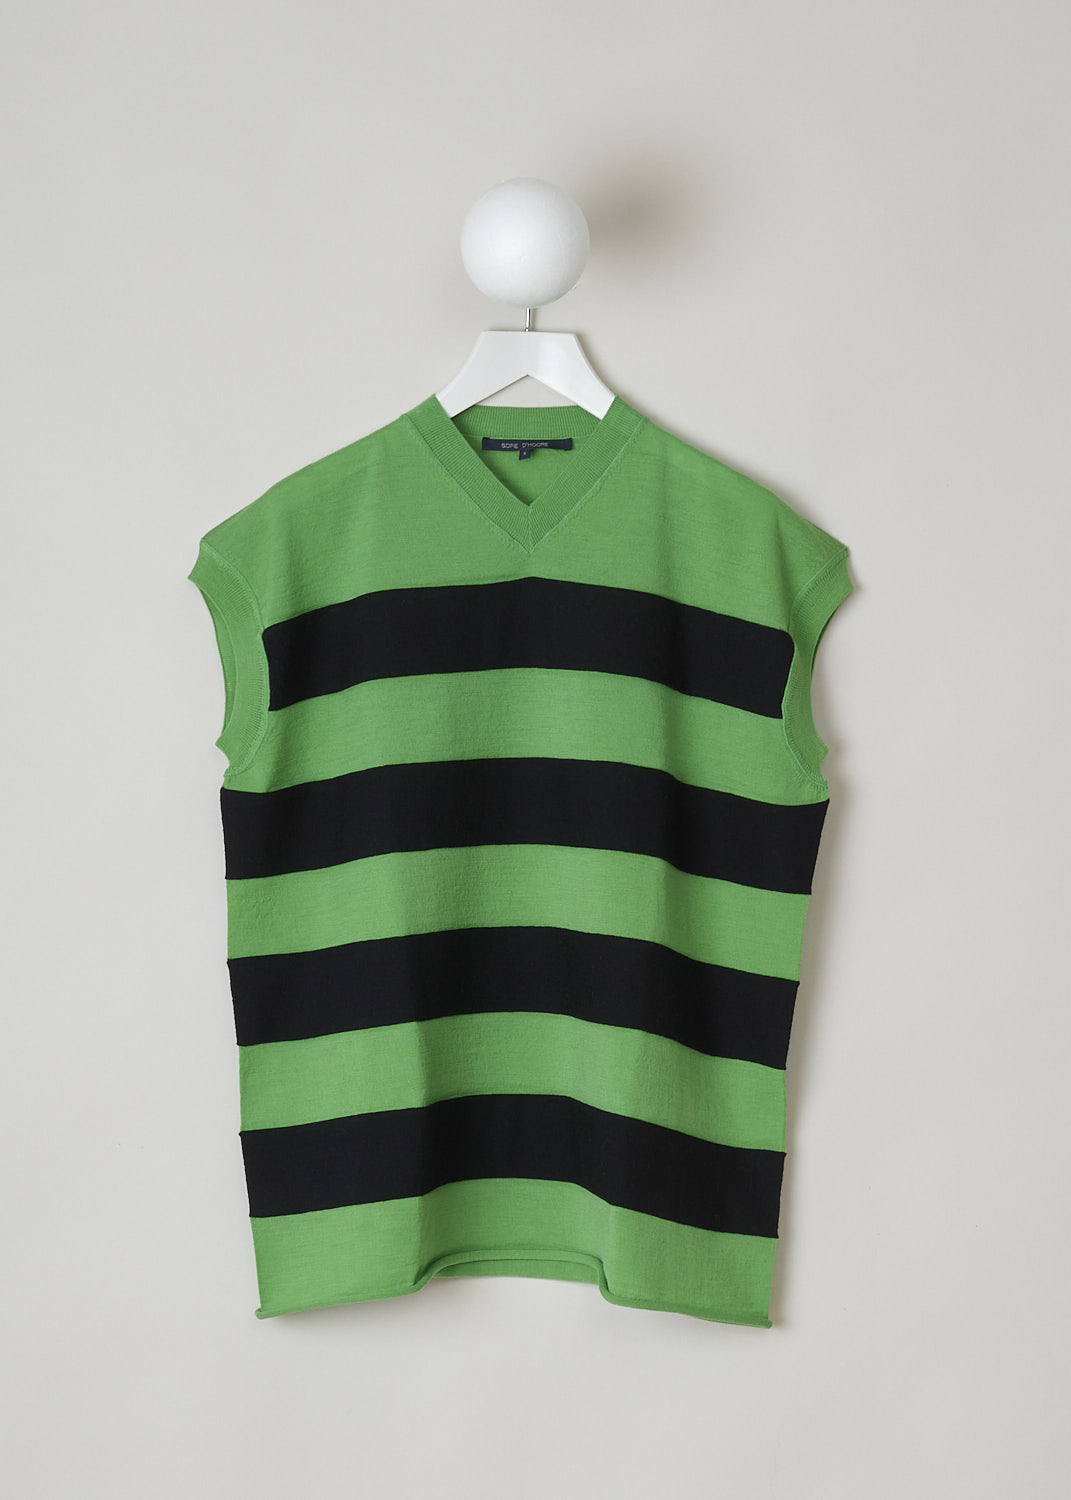 SOFIE Dâ€™HOORE, GREEN AND BLACK STRIPED VEST, MODA_YFIMBI_GREEN_BLACK, Green, Black, Front, This green and black striped wool vest has a ribbed V-neckline. That same ribbed finish can be found around the armholes. The vest has a rolled hemline. The vest has a wider silhouette. 
